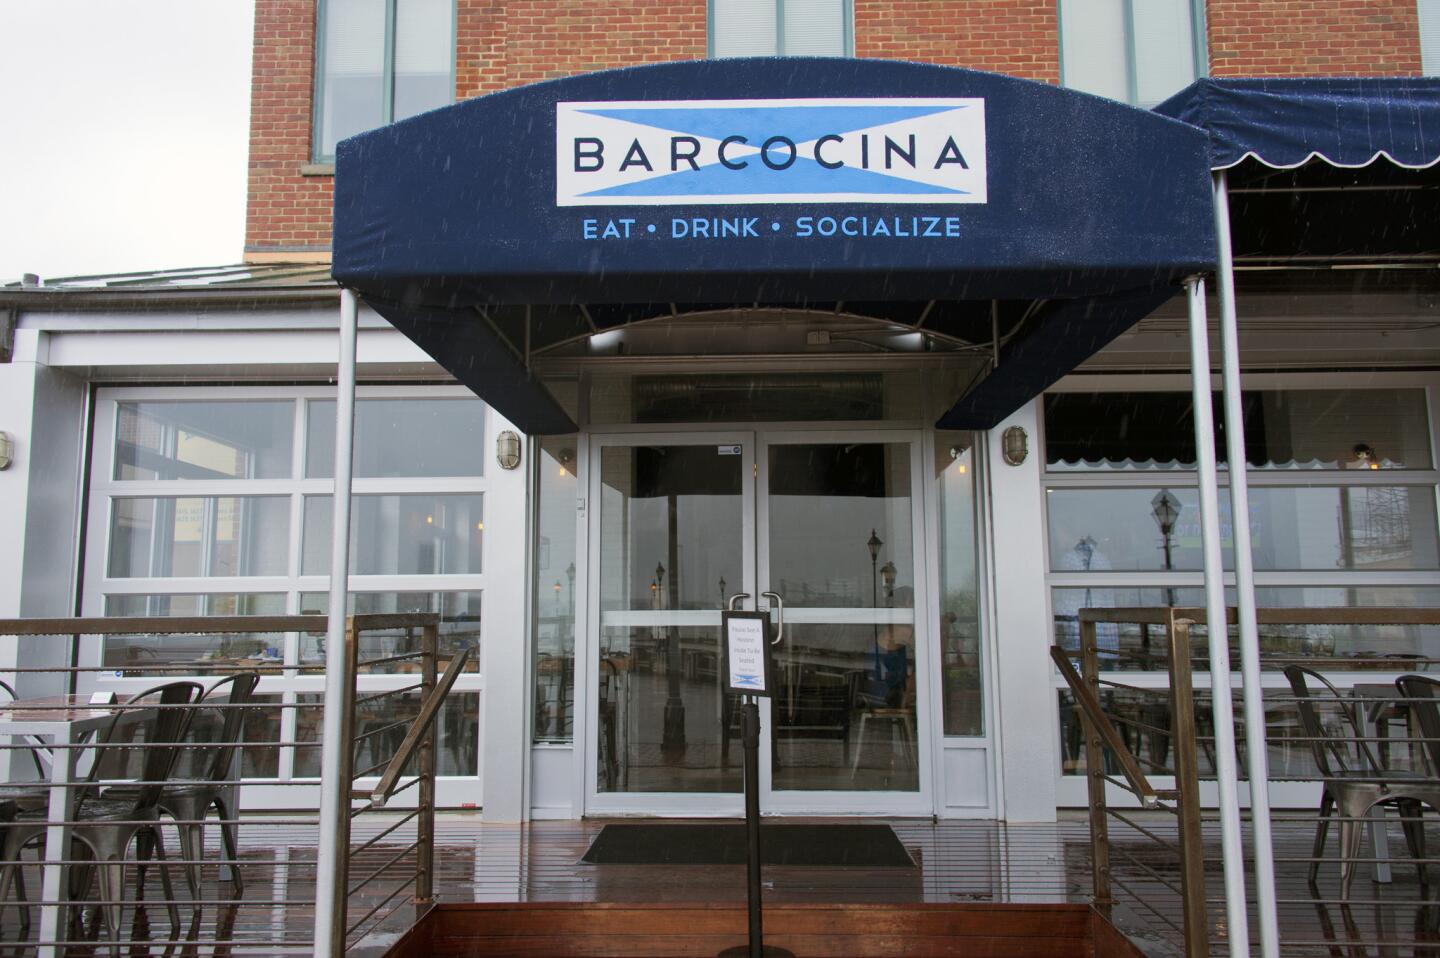 Venue info: Barcocina, 1629 Thames St., 410-563-8800 Note: Barcocina is offering, in addition to the $35 three-course menu, optional cocktail pairings for $20. Menu highlights: Dinner: Salsa trio, corn and tortilla soup, pan-roasted salmon, grilled pork loin, grilled portobello enchiladas, chocolate ganache, peach empanadas Restaurant Week website: Baltimore Restaurant Week